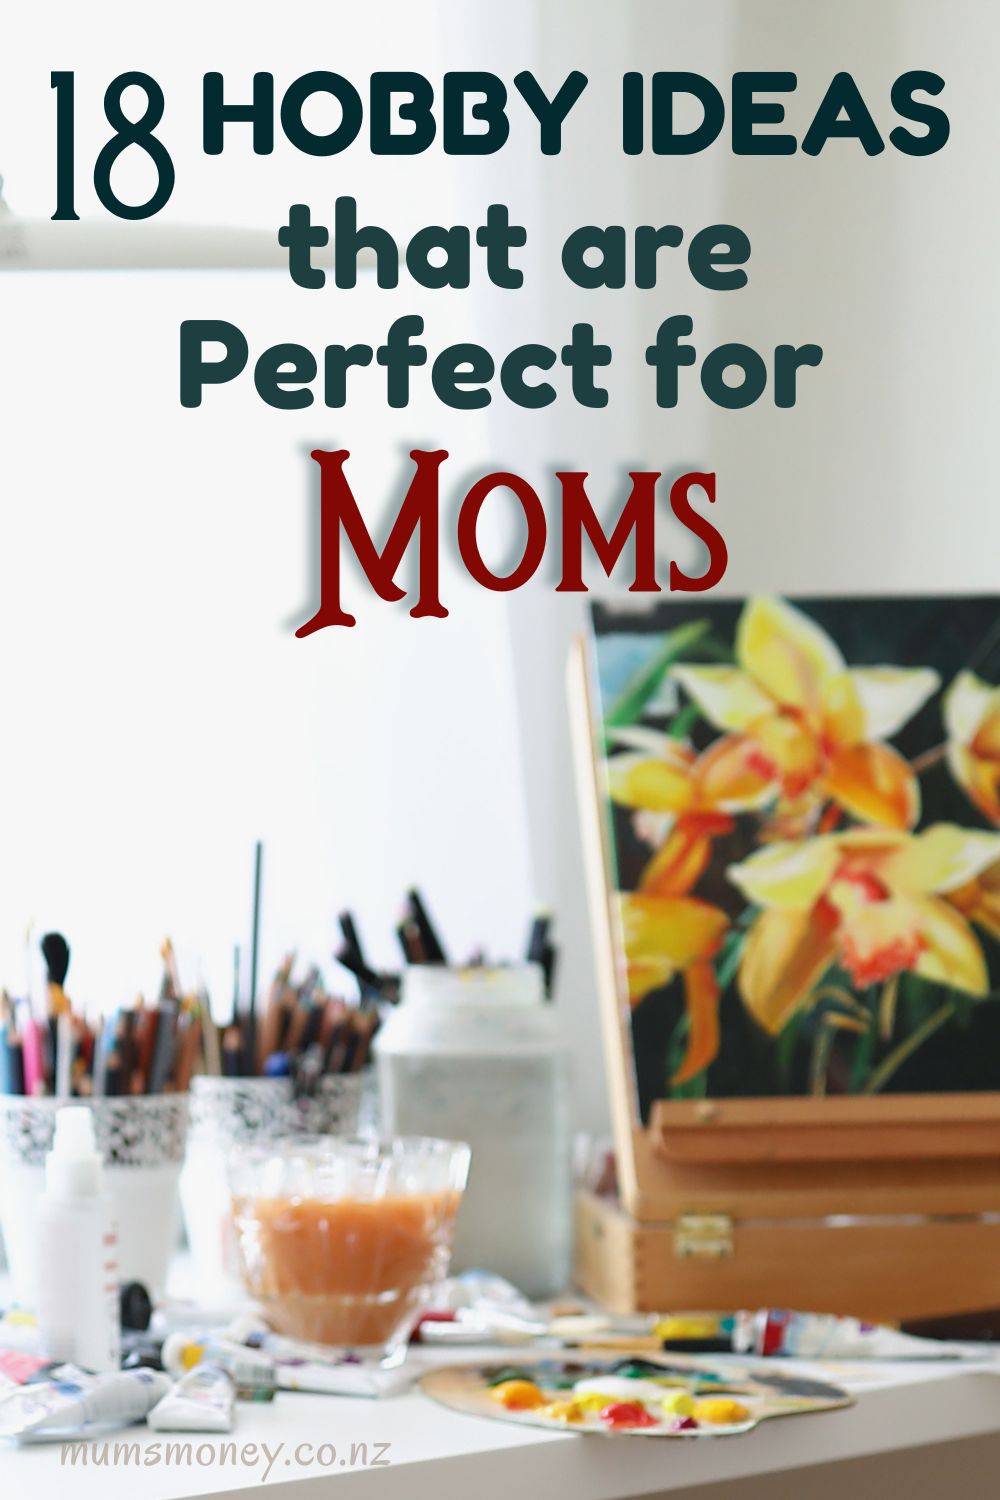 Hobby Ideas That Are Perfect for Moms Pin Image